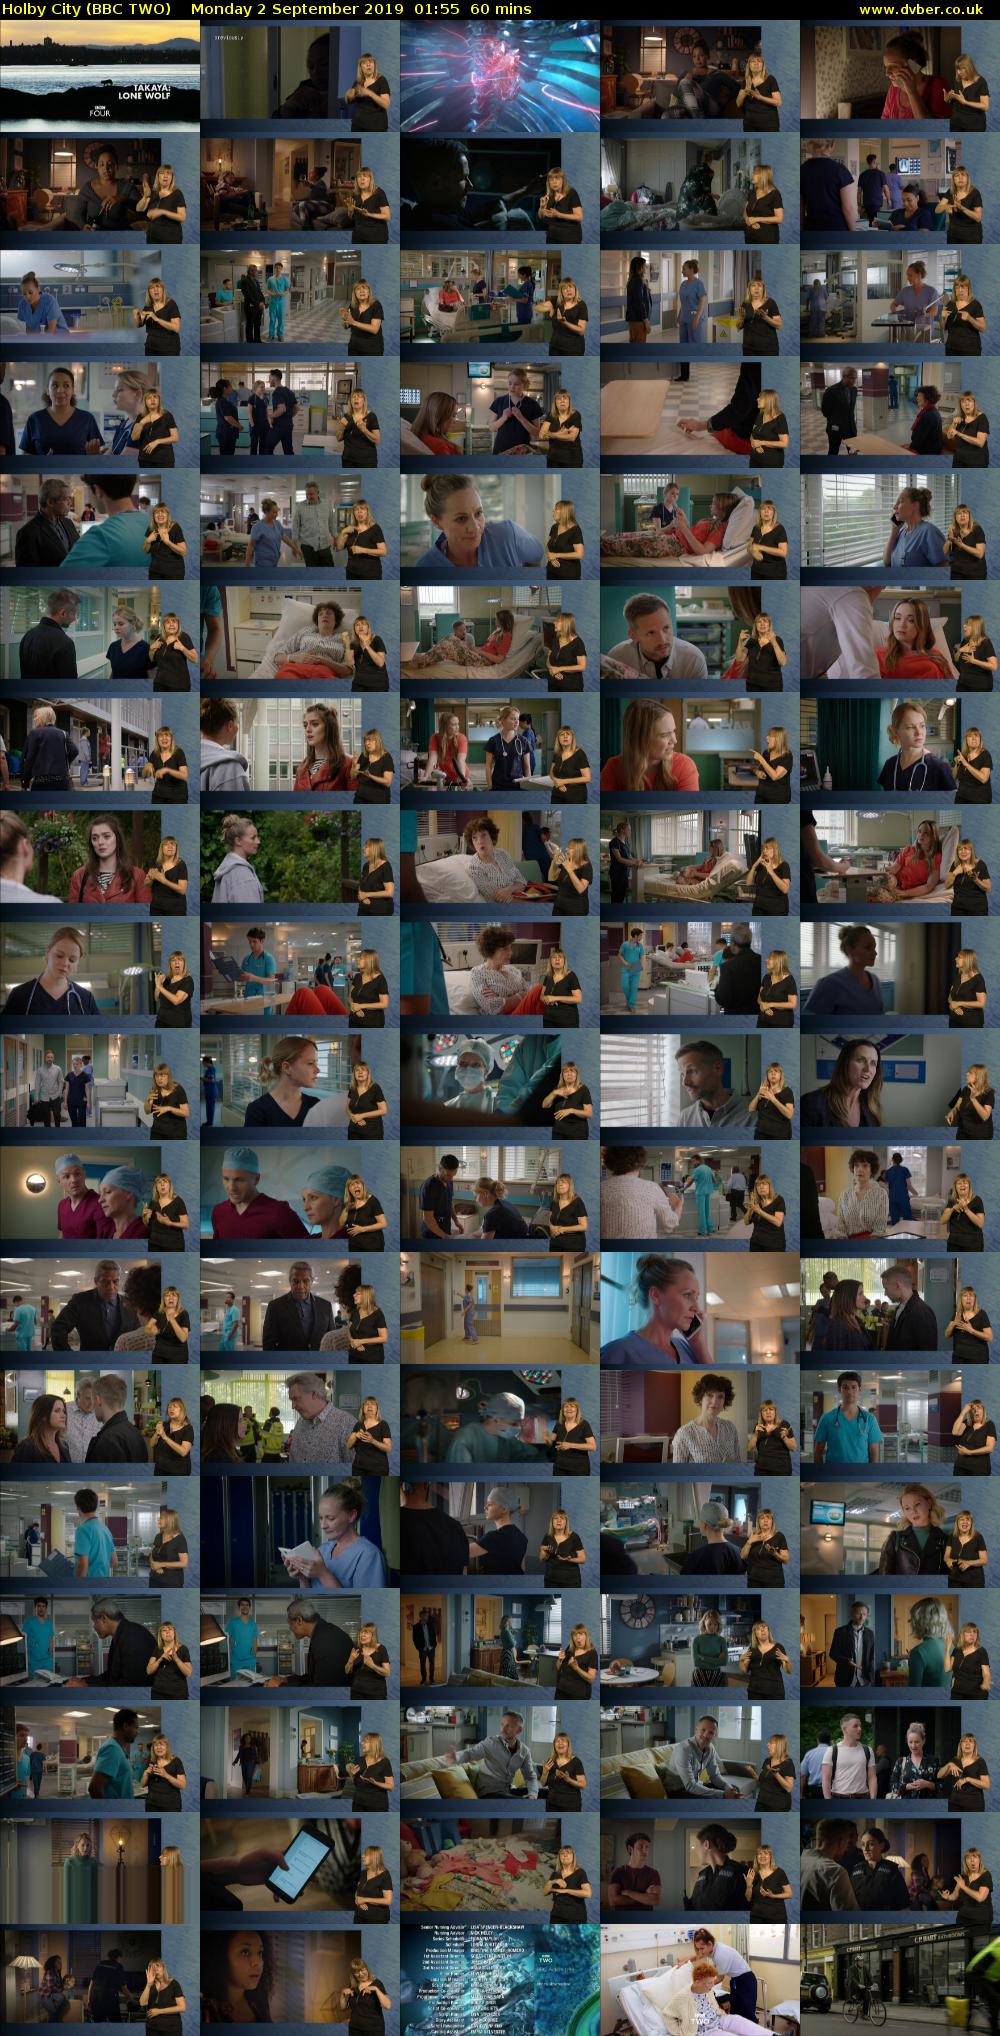 Holby City (BBC TWO) Monday 2 September 2019 01:55 - 02:55